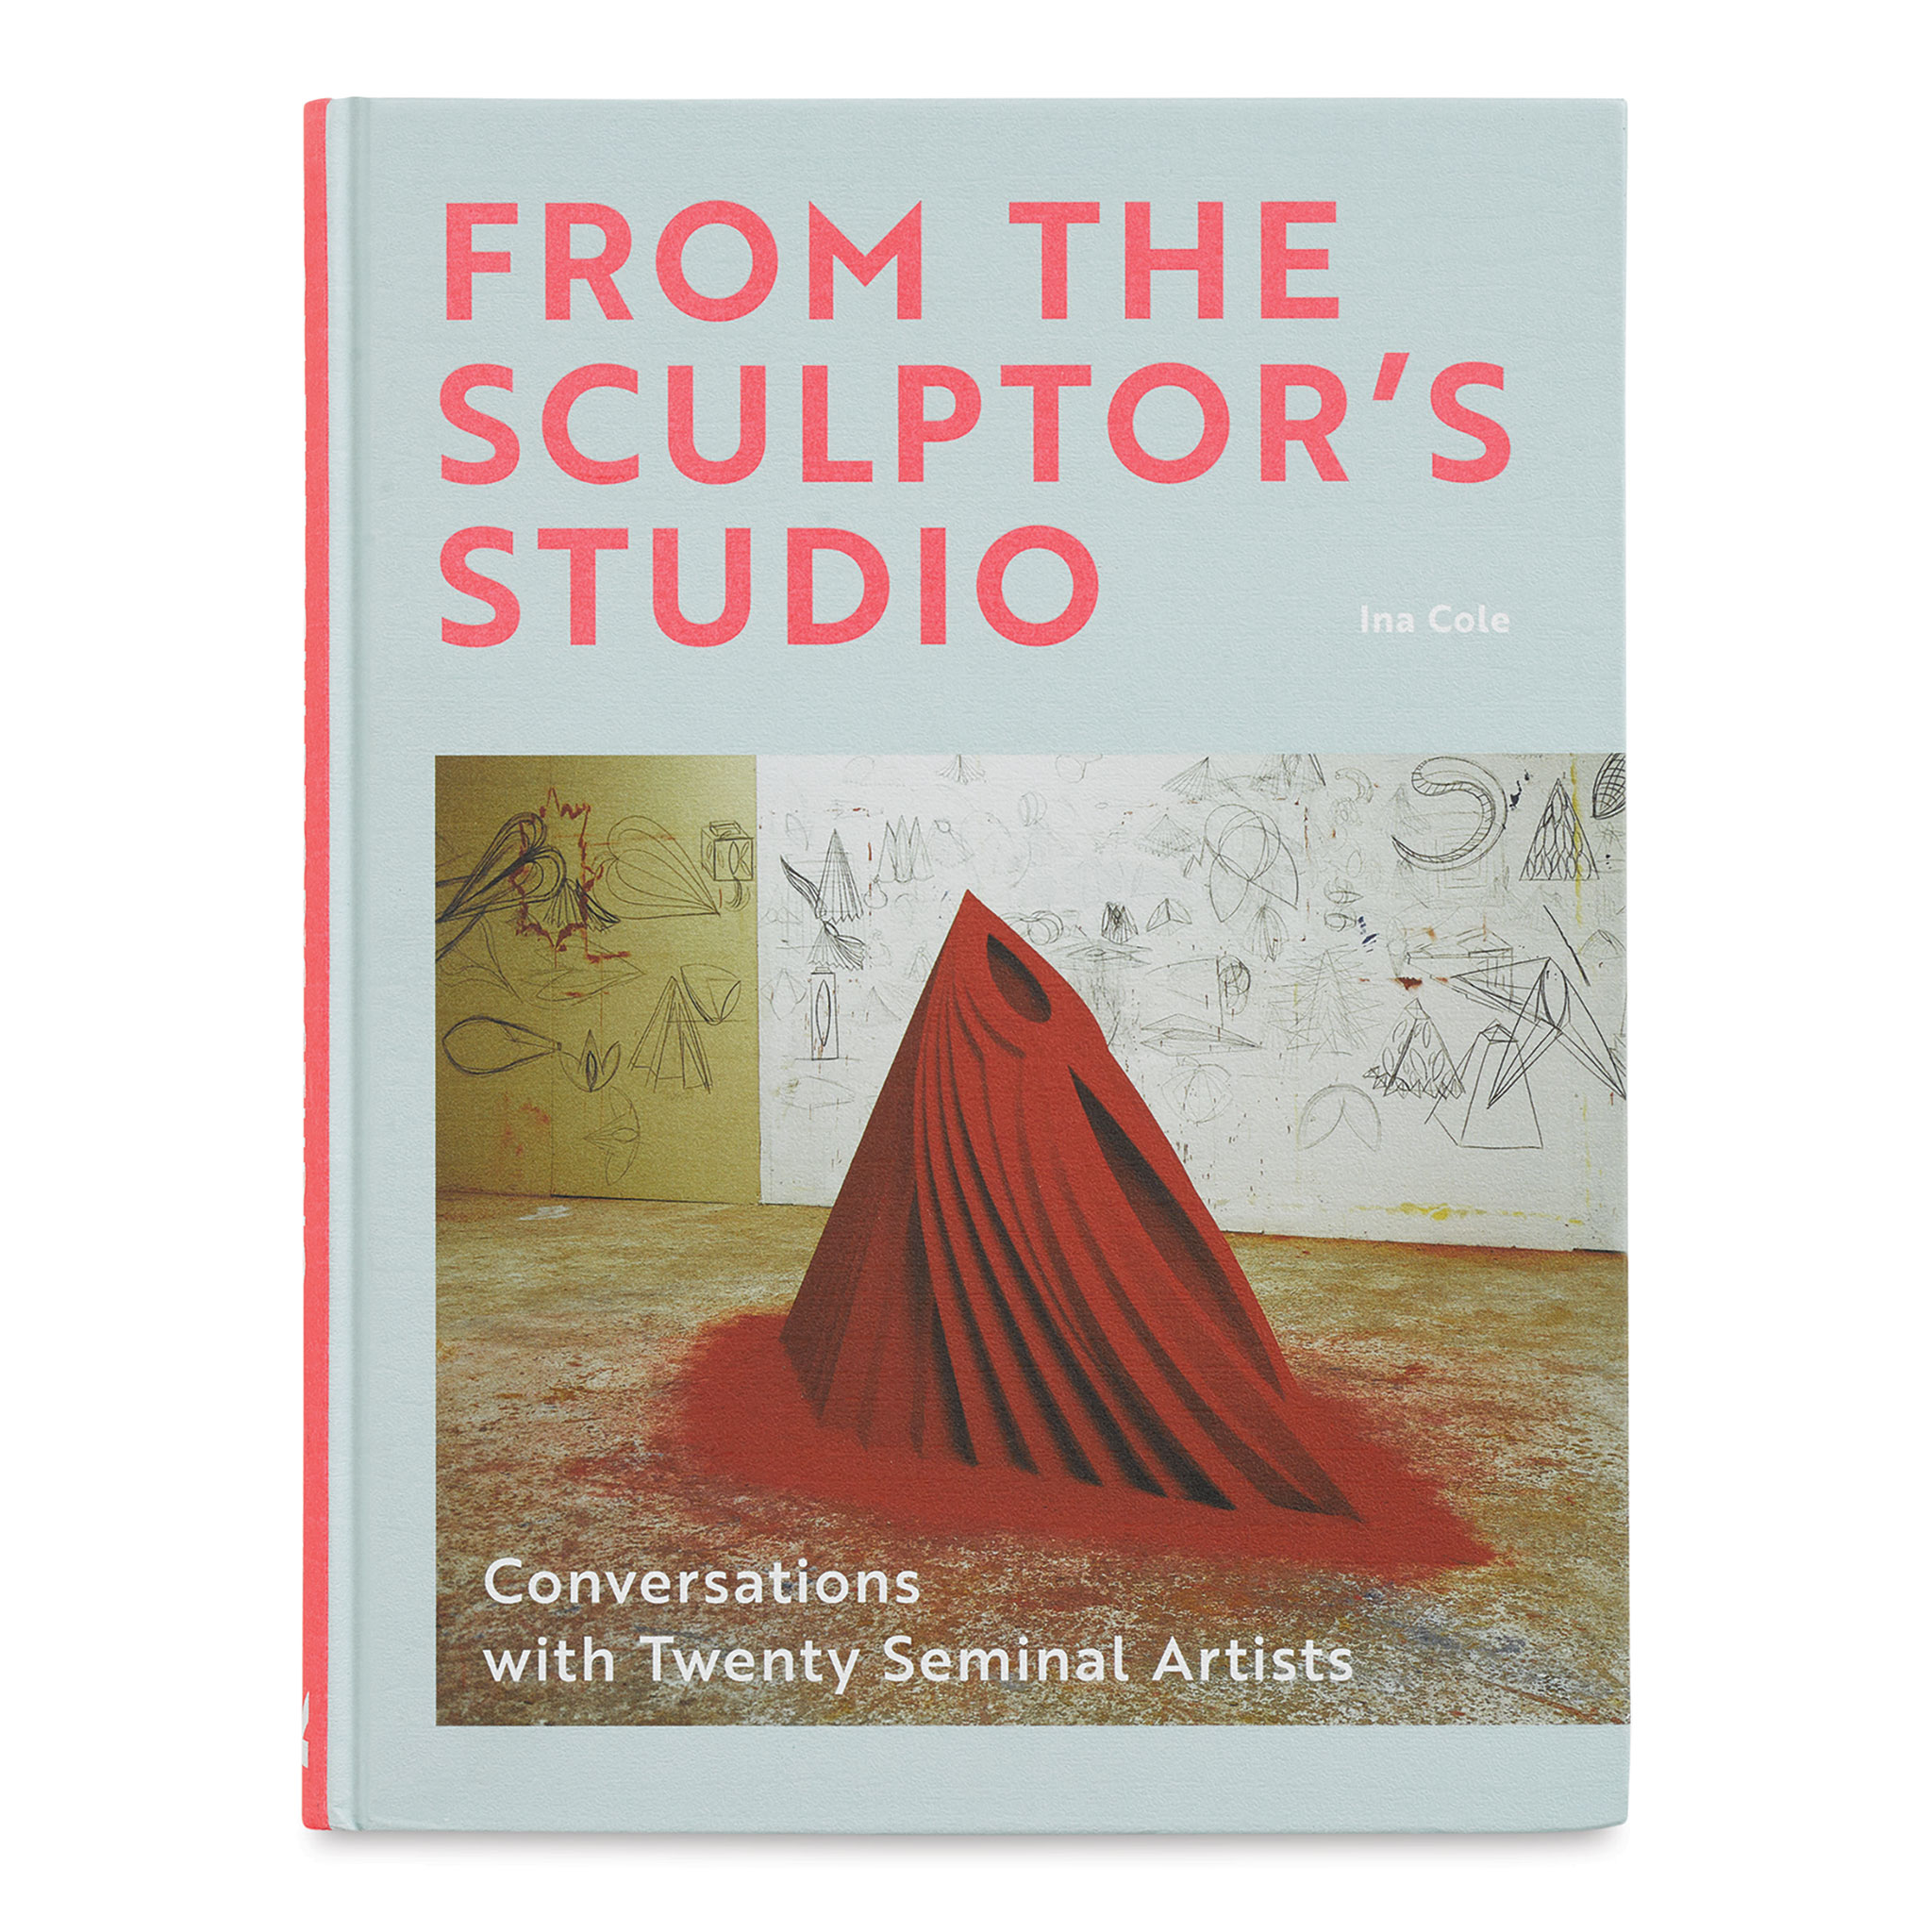 From the Sculptor’s Studio